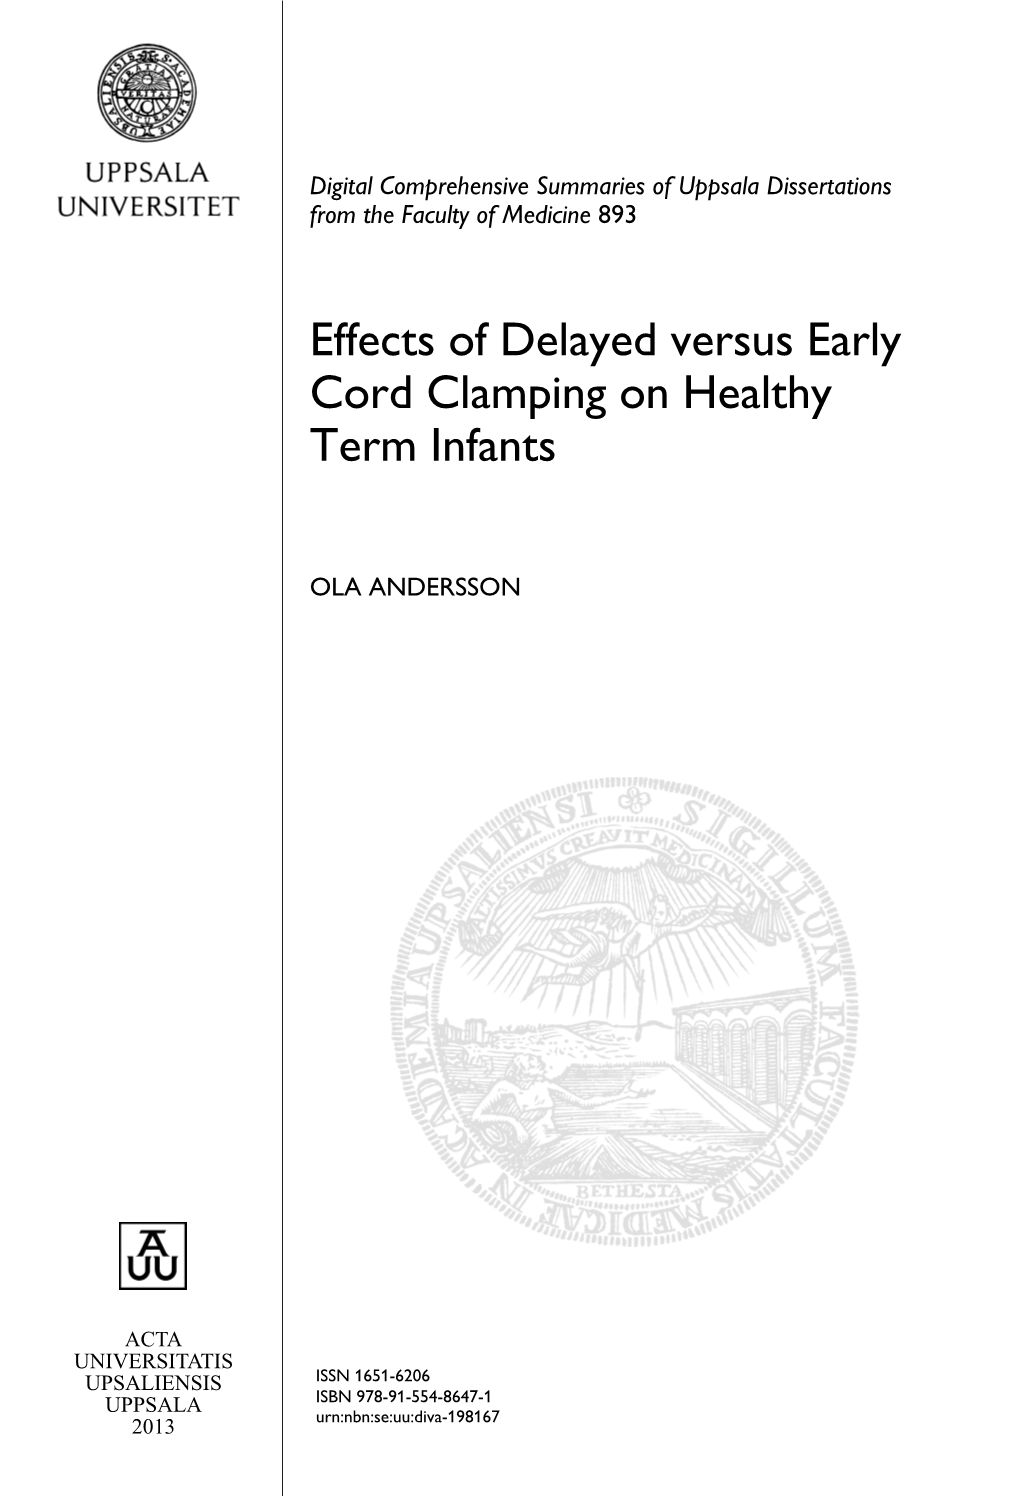 Effects of Delayed Versus Early Cord Clamping on Healthy Term Infants